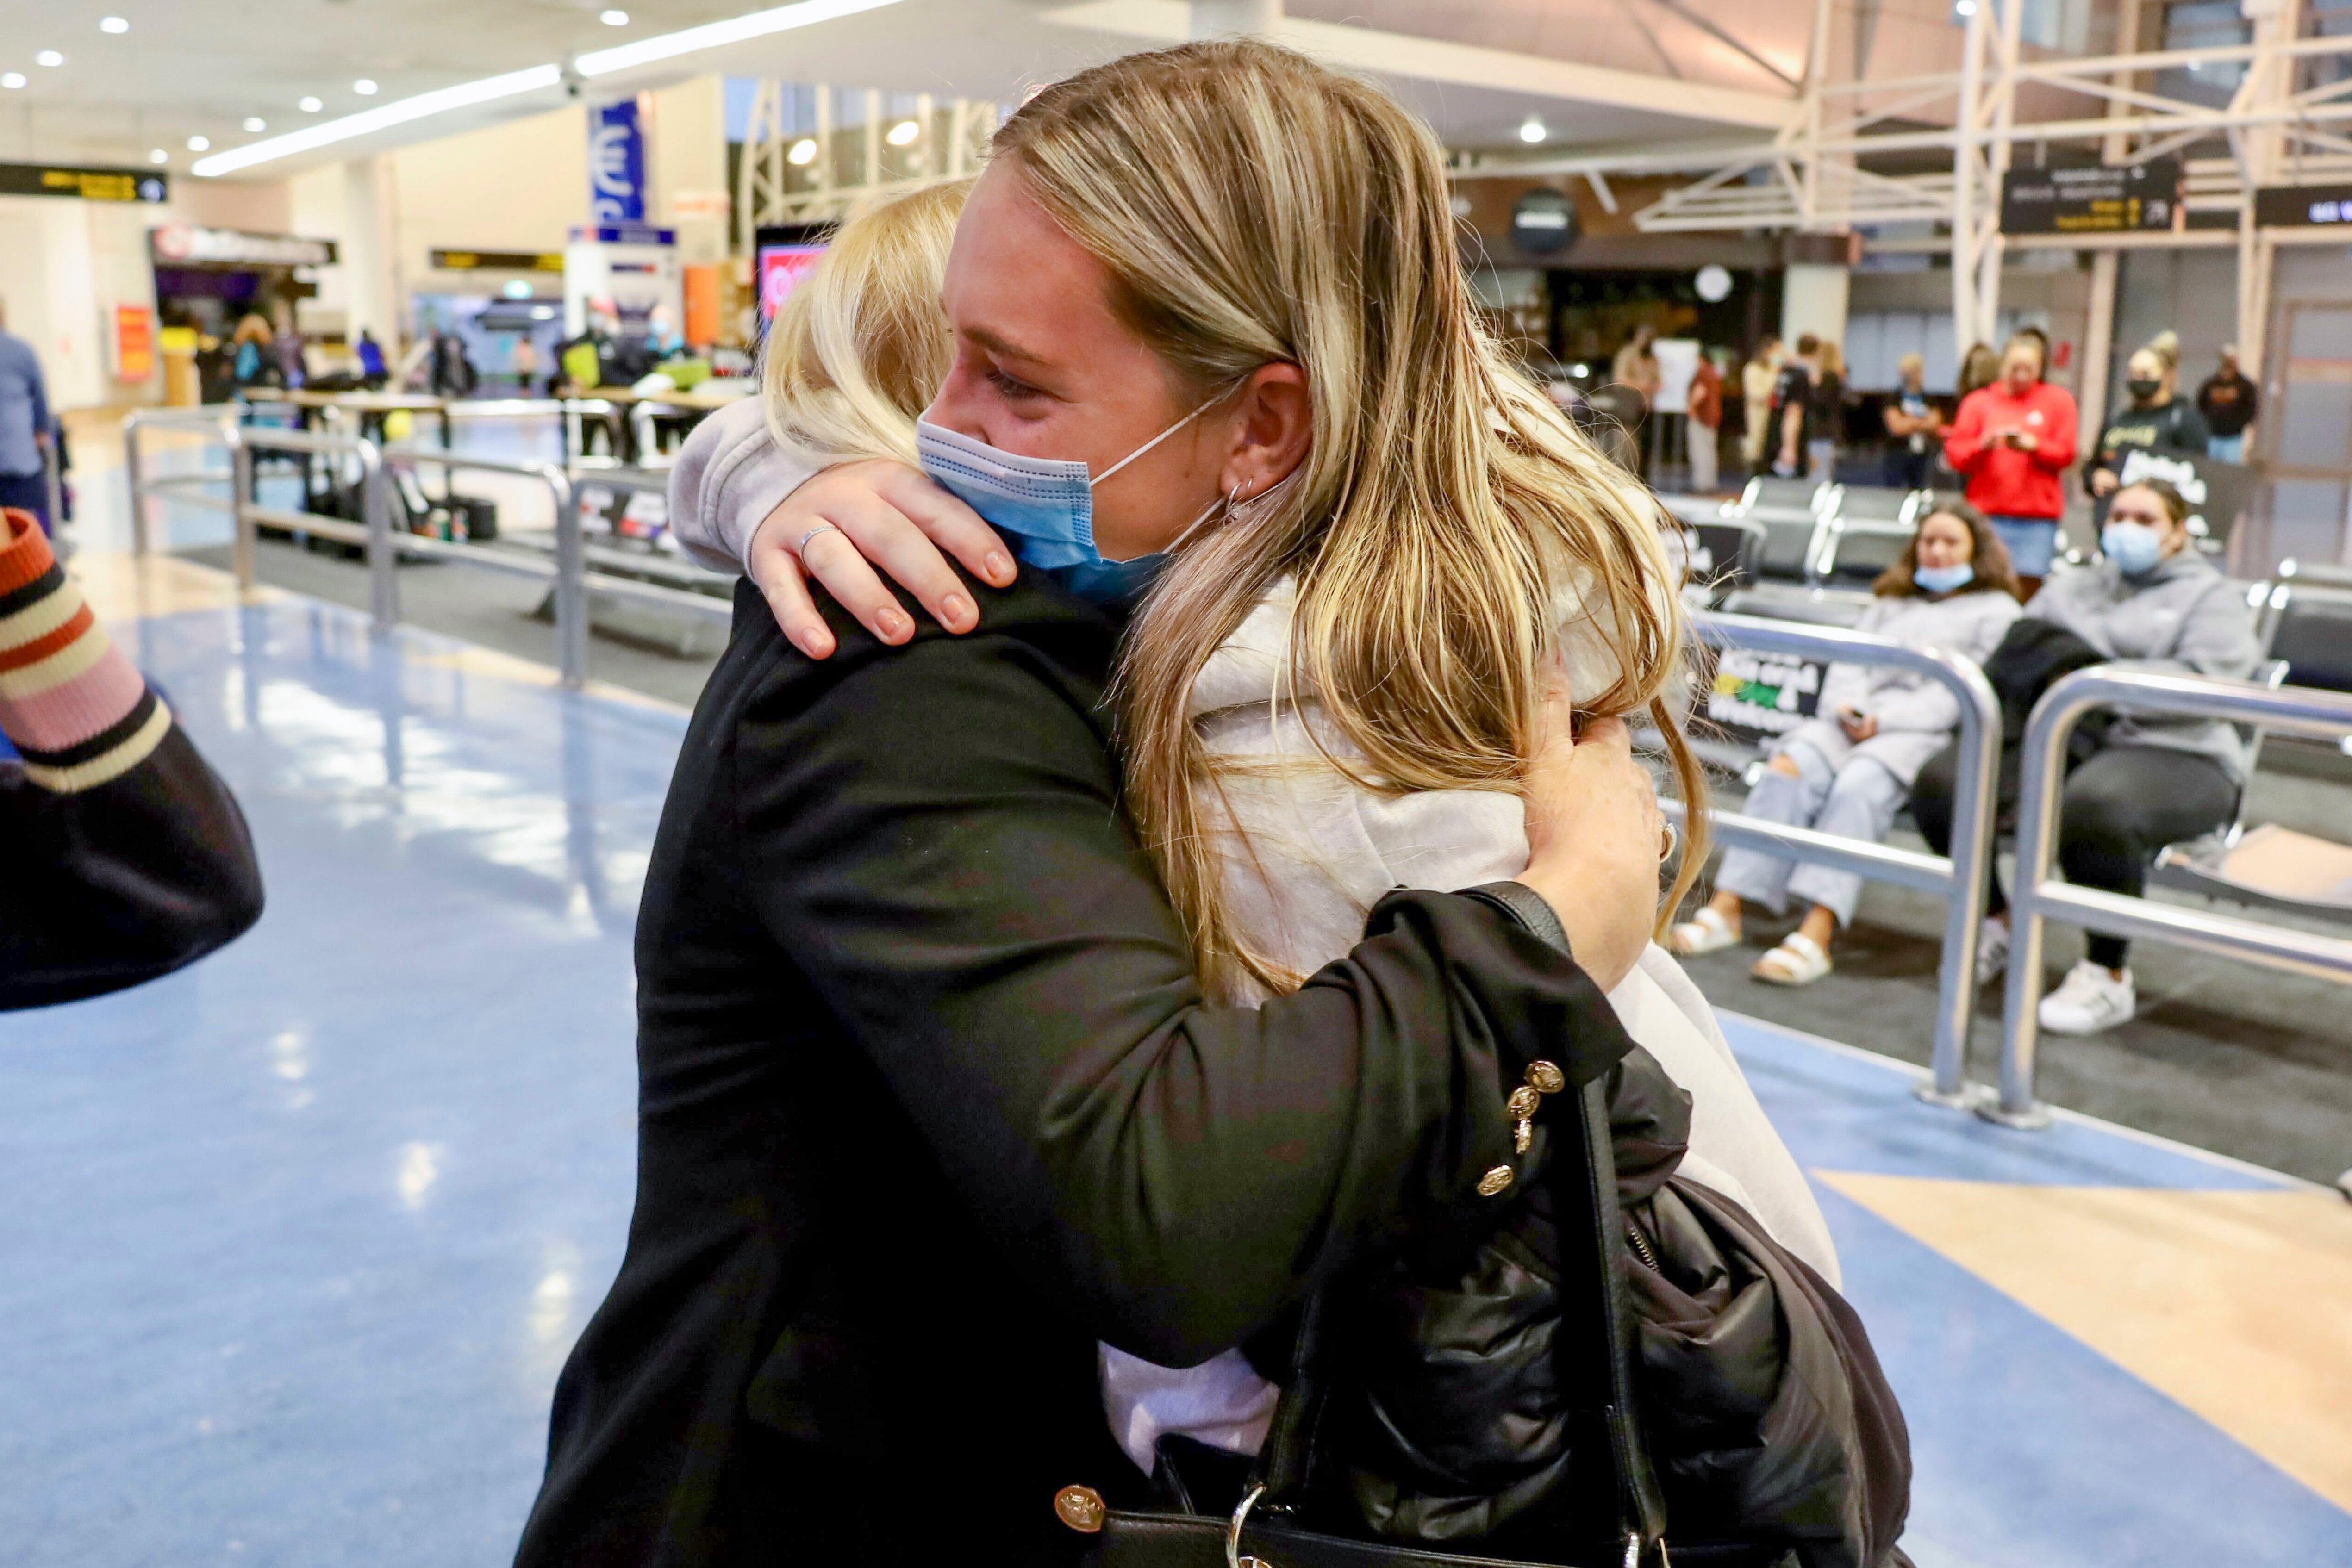 Families embrace after a flight from Los Angeles arrived at Auckland International Airport, as New Zealand’s border opened for visa-waiver countries Monday, 2 May 2022